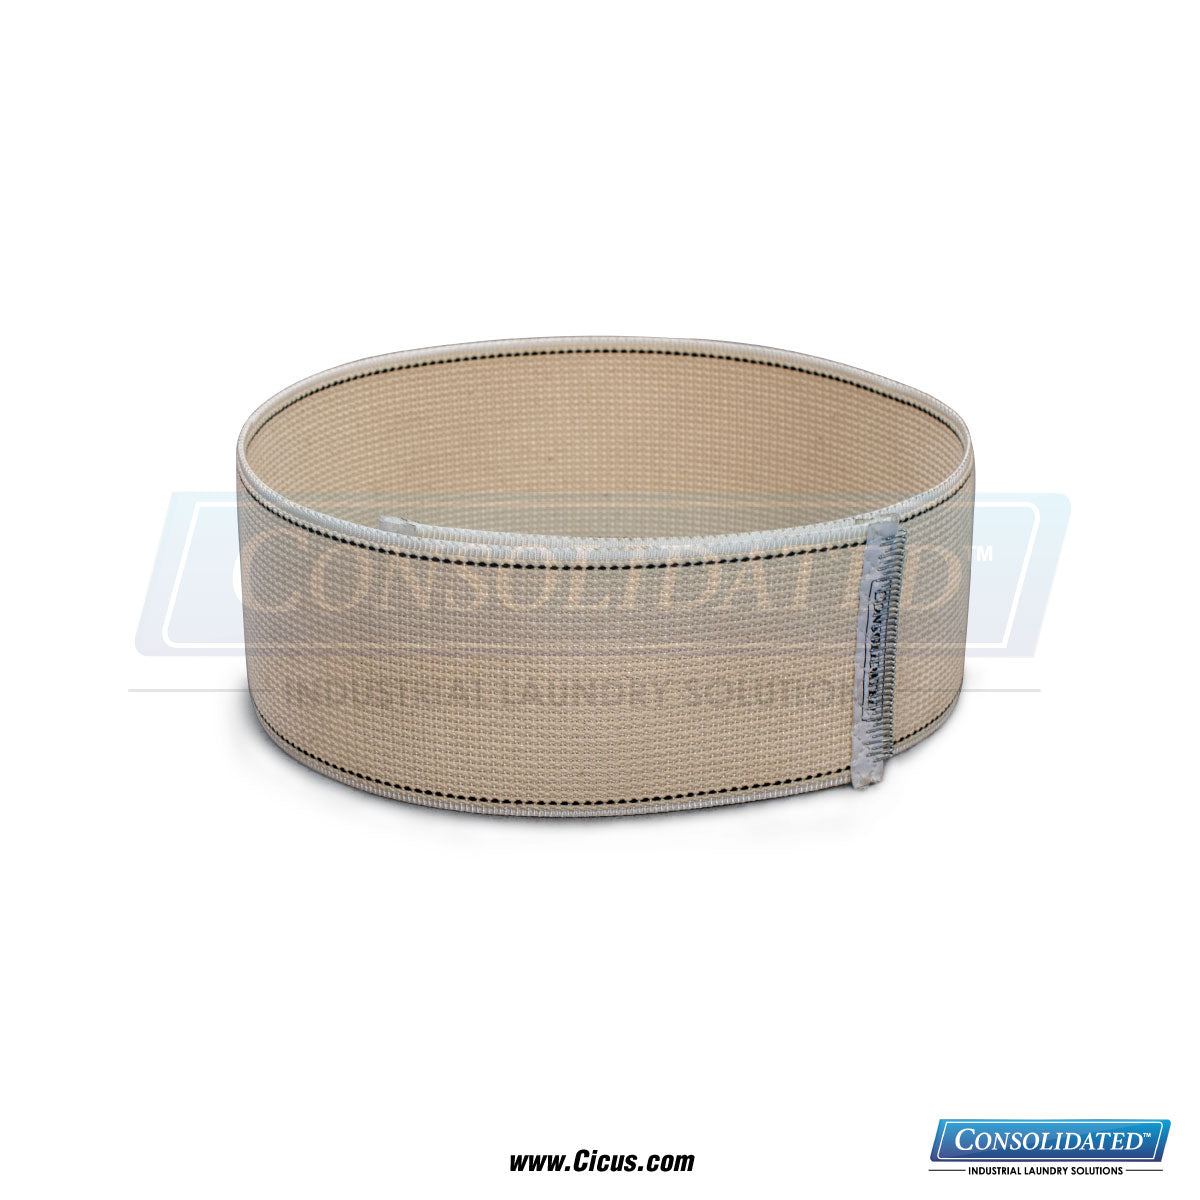 CIC Exclusive Chicago Dryer Canvas Ribbon - 2" x 106" (1001-186)